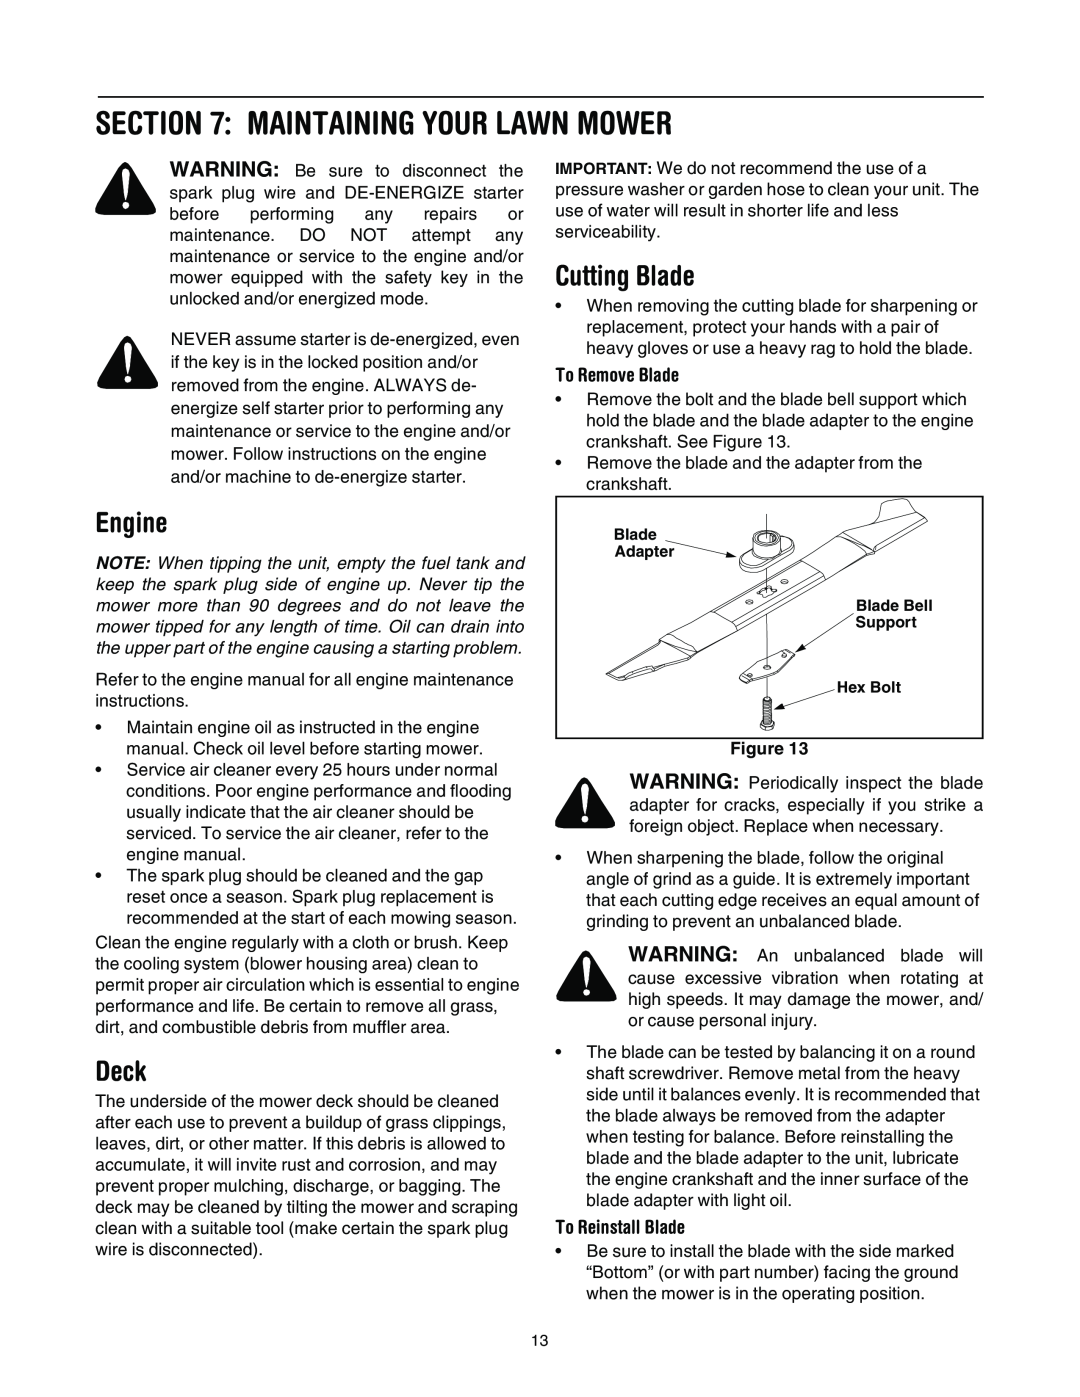 Bolens 589 manual Maintaining Your Lawn Mower, Engine, Deck, Cutting Blade, To Remove Blade, To Reinstall Blade 